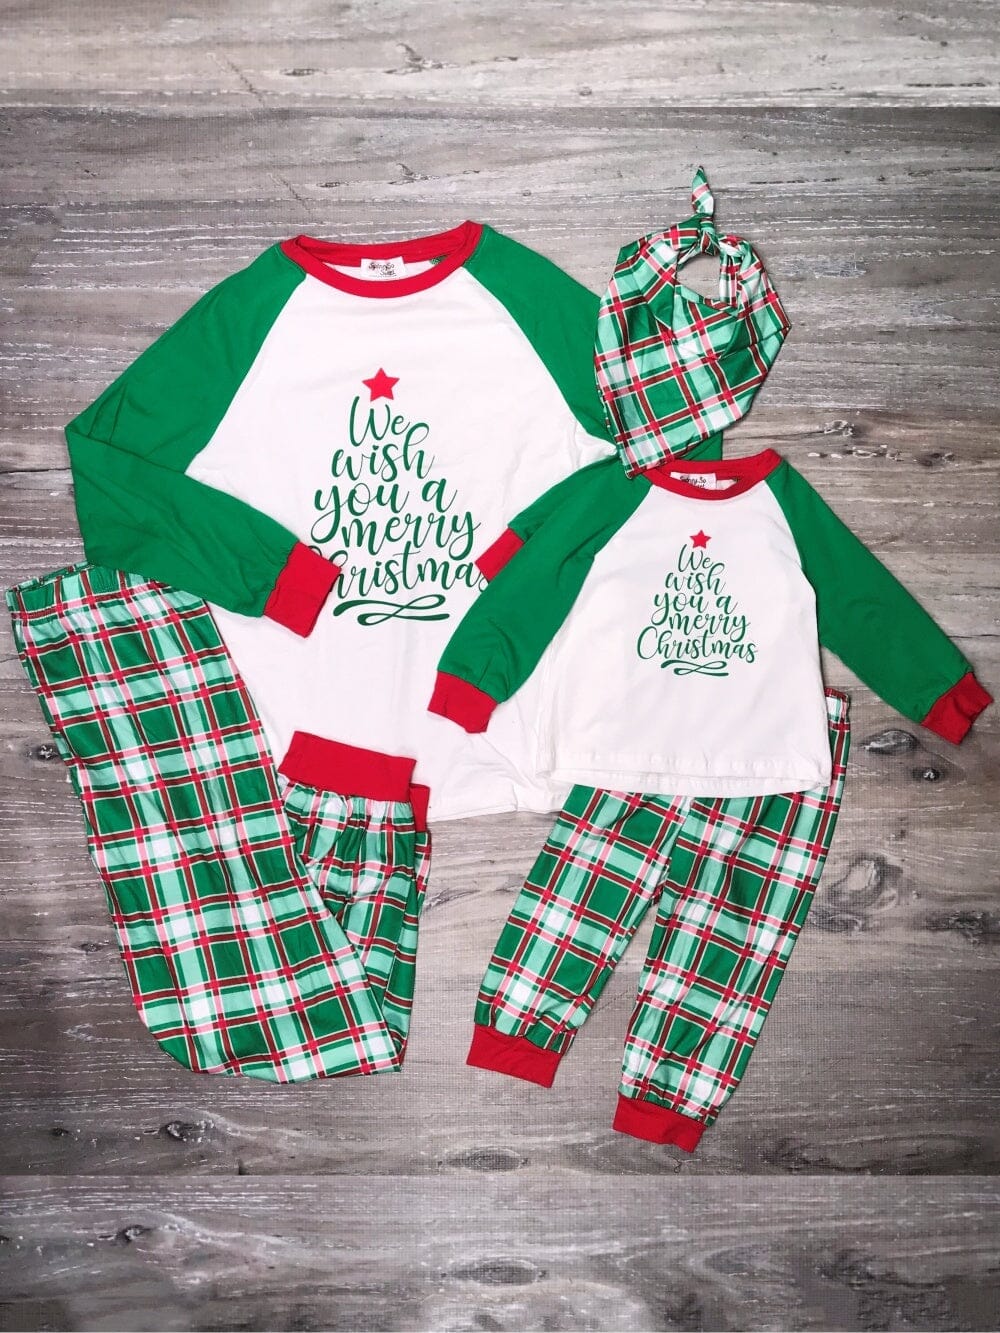 Where to find adorable matching pyjamas for the whole family